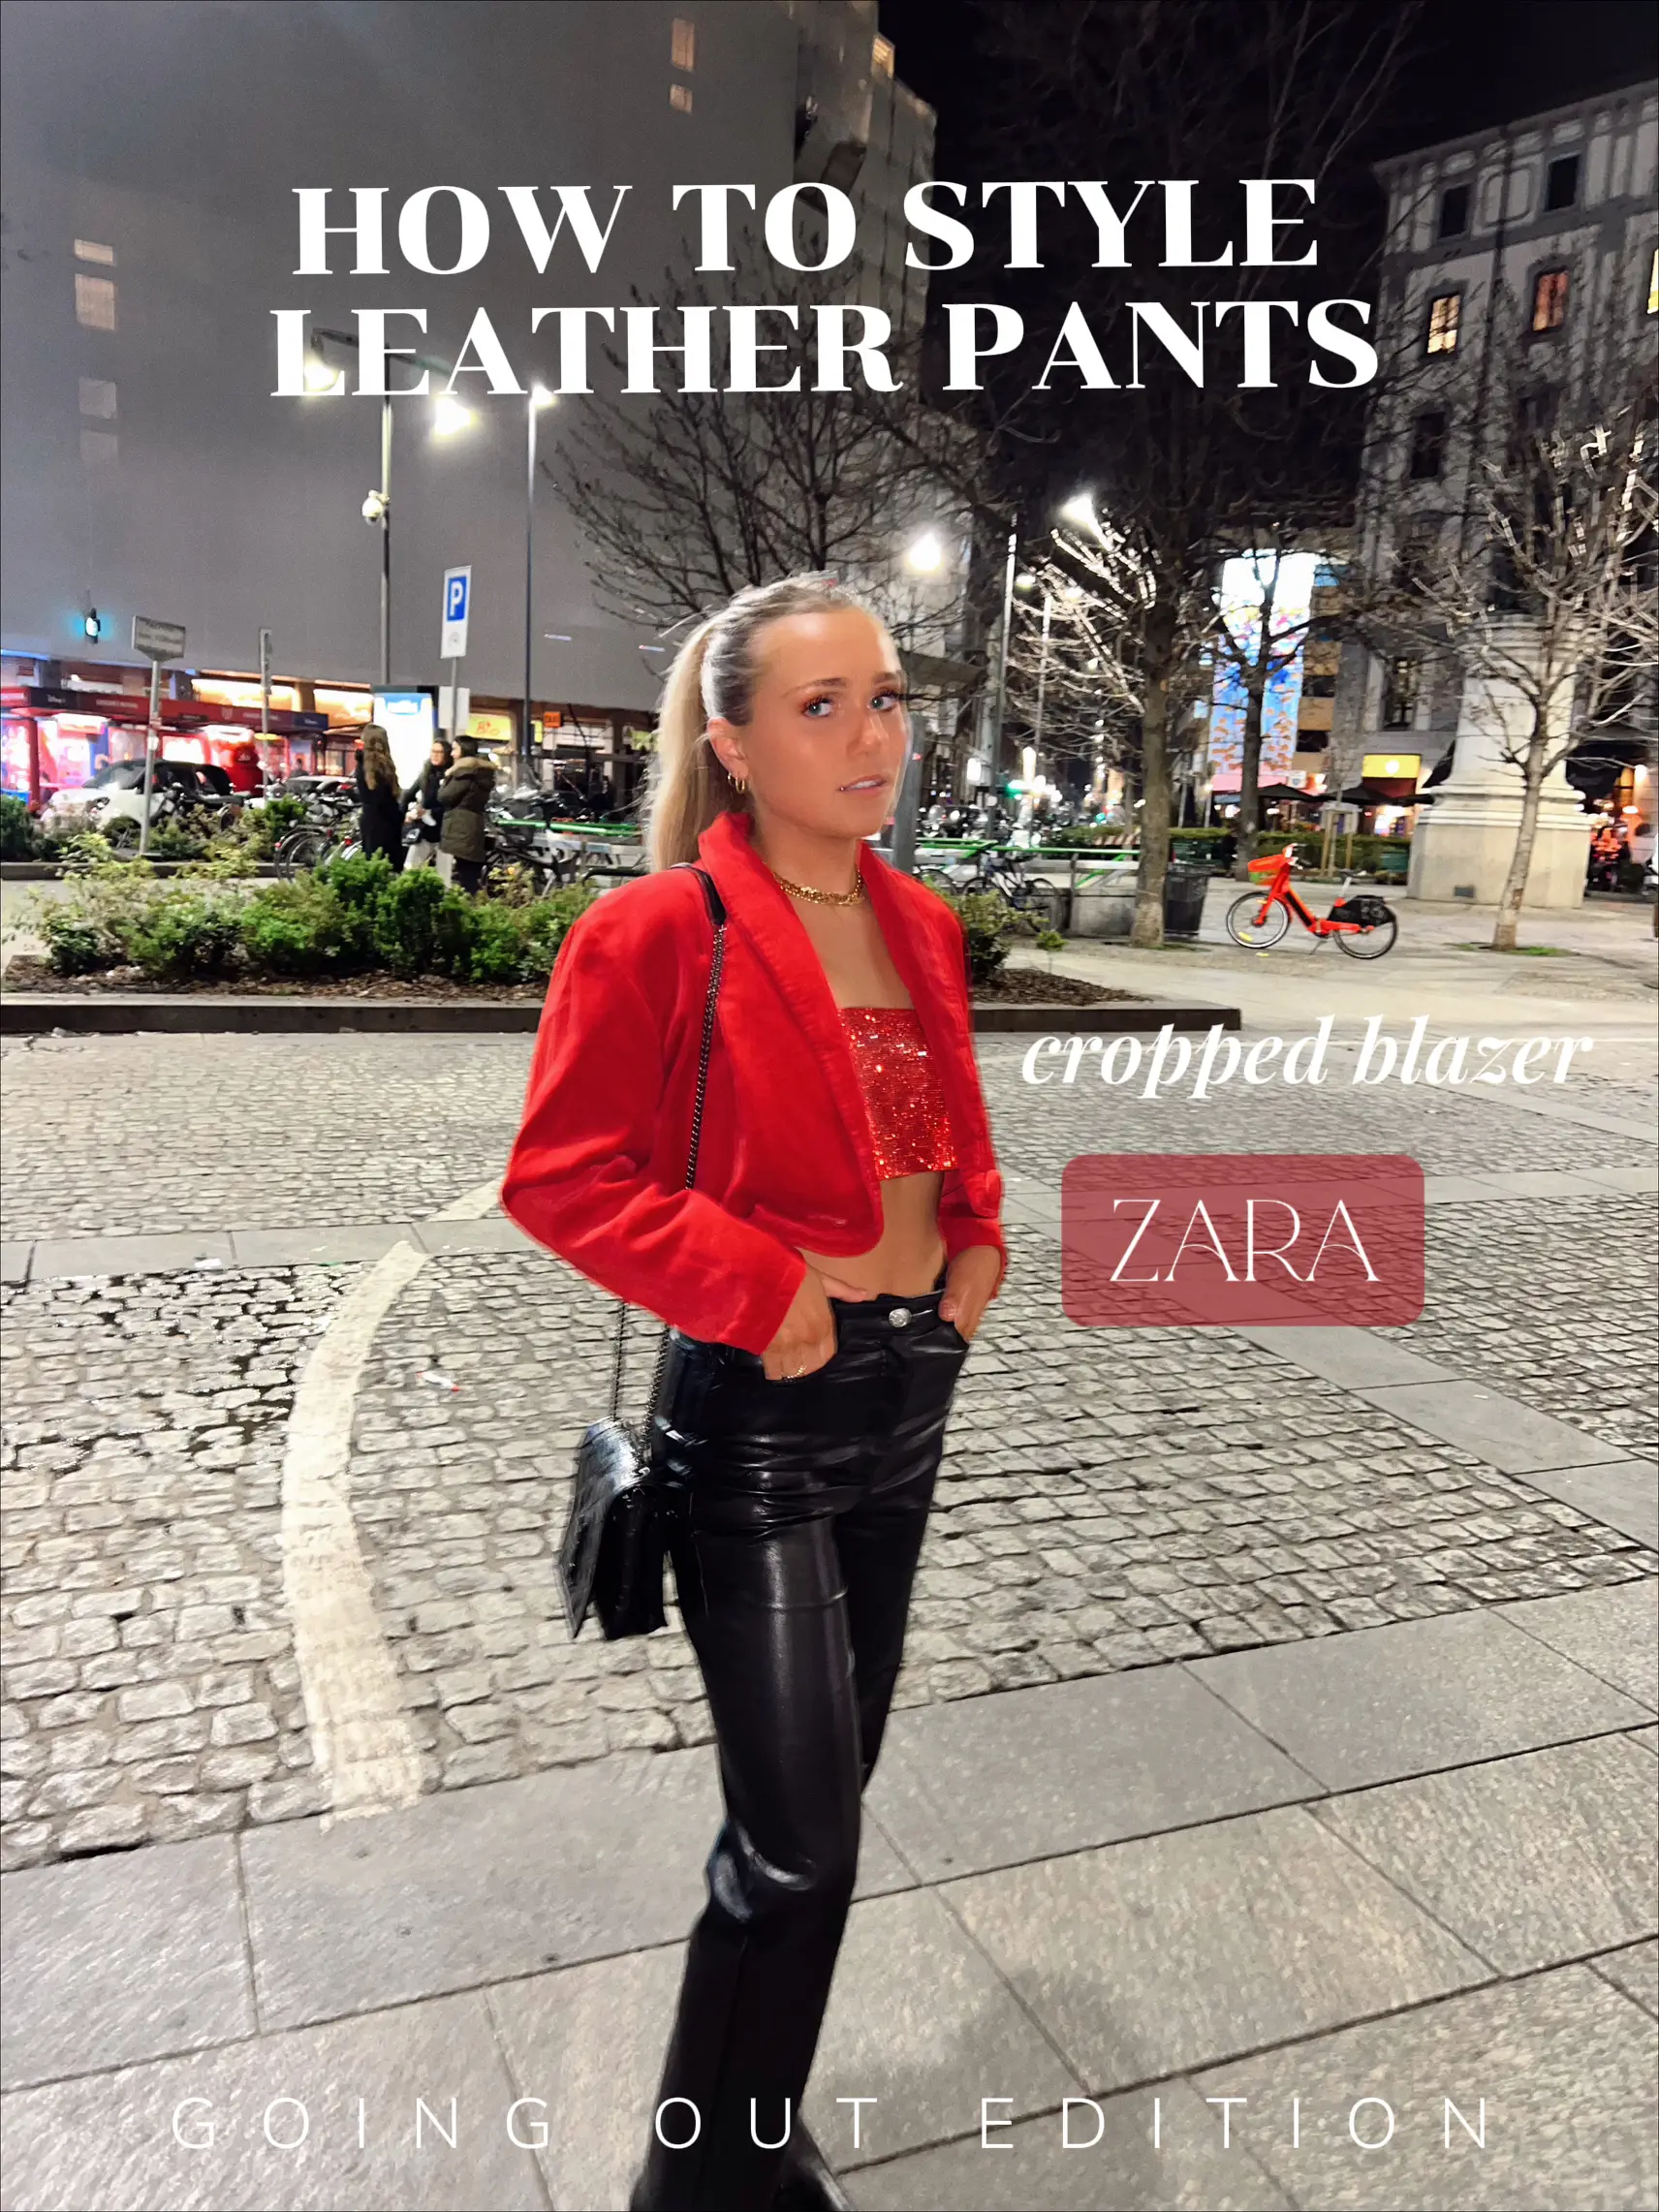 How to style leather pants✨  Gallery posted by Kiersten Parkin